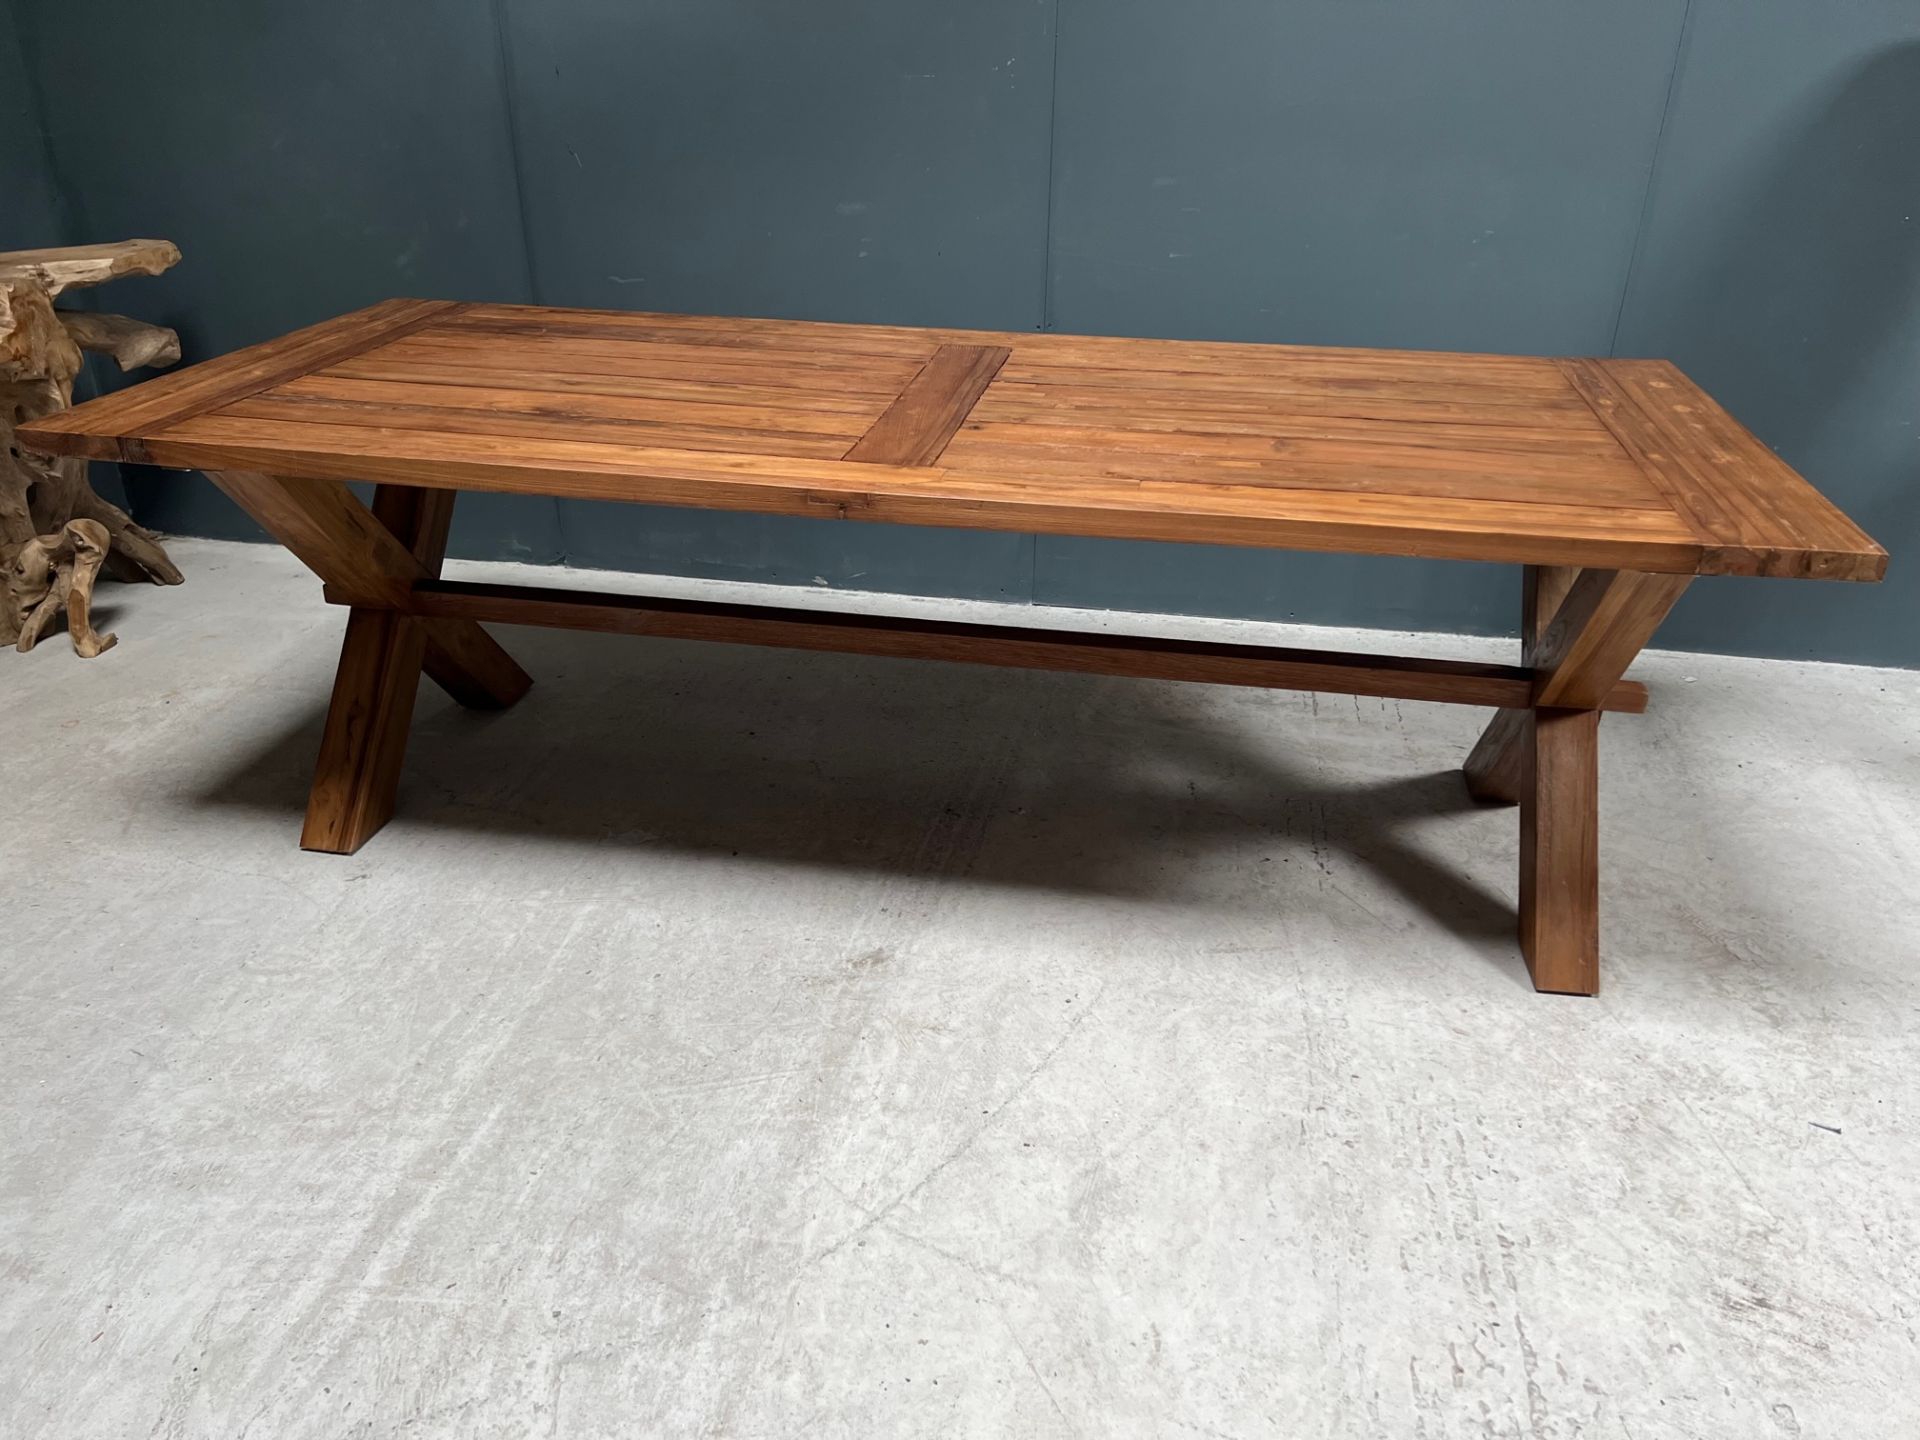 NEW PACKAGED HUGE 240CM RECYCLED TEAK DINING TABLE (APPROX 240CM LONG X 76CM TALL X 100CM WIDE) - Image 12 of 13